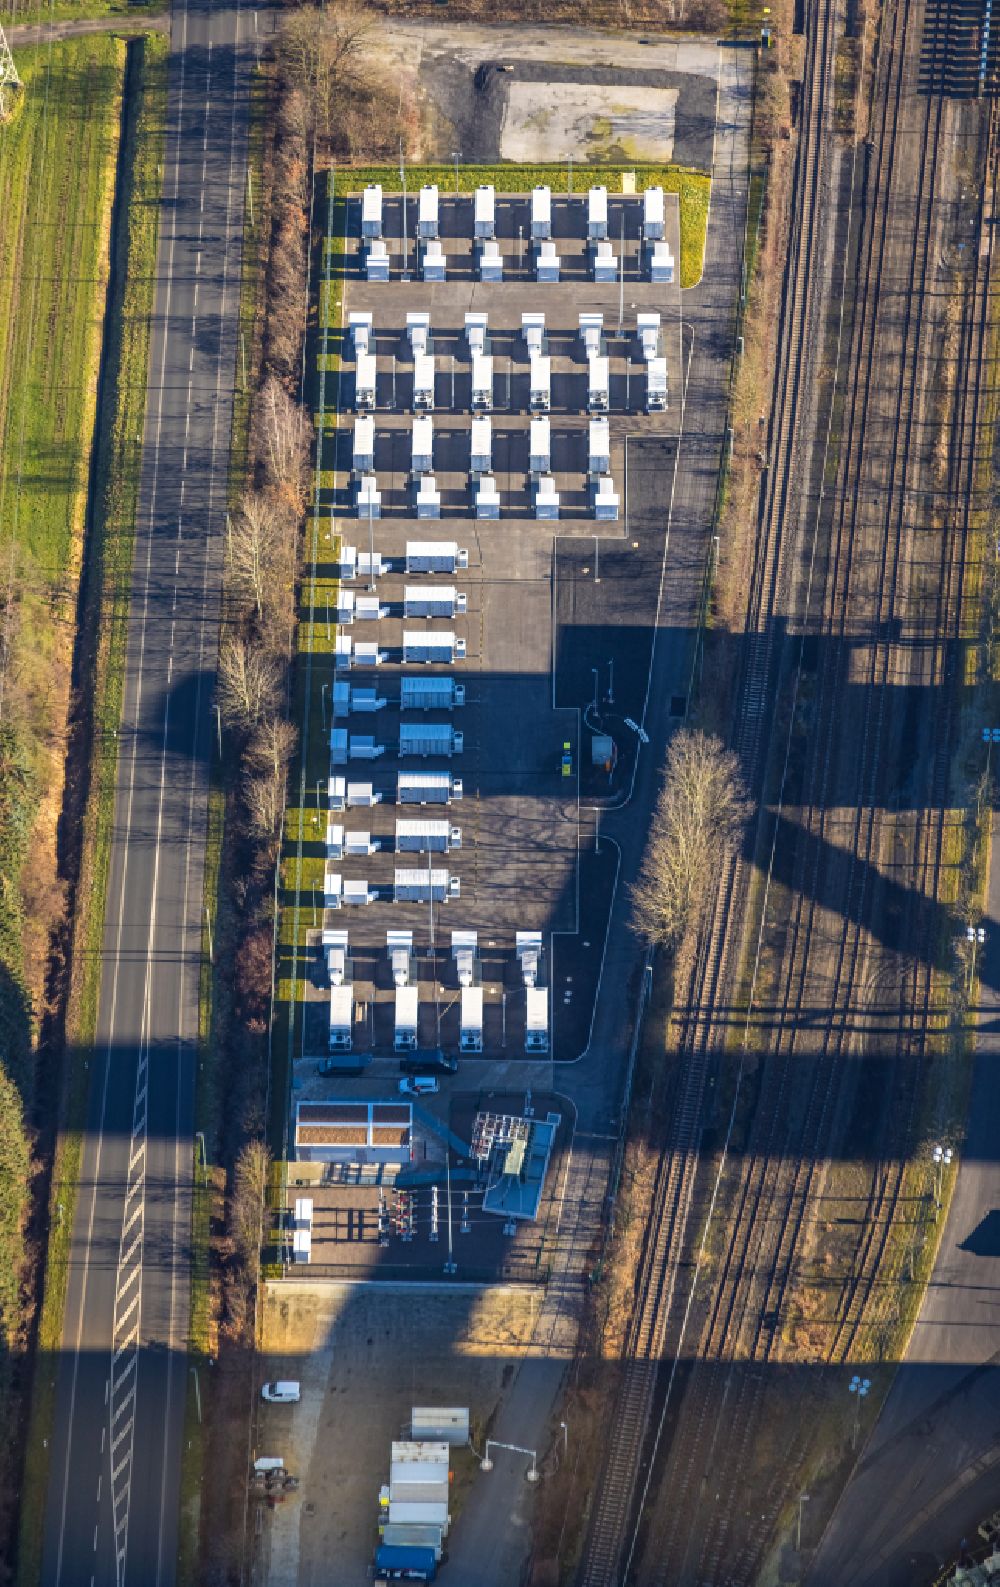 Werne from the bird's eye view: Standing accumulators as battery storage for the power supply at the site of the Gersteinwerk power plant in the Stockum district in Werne in the Ruhr area in the state of North Rhine-Westphalia, Germany